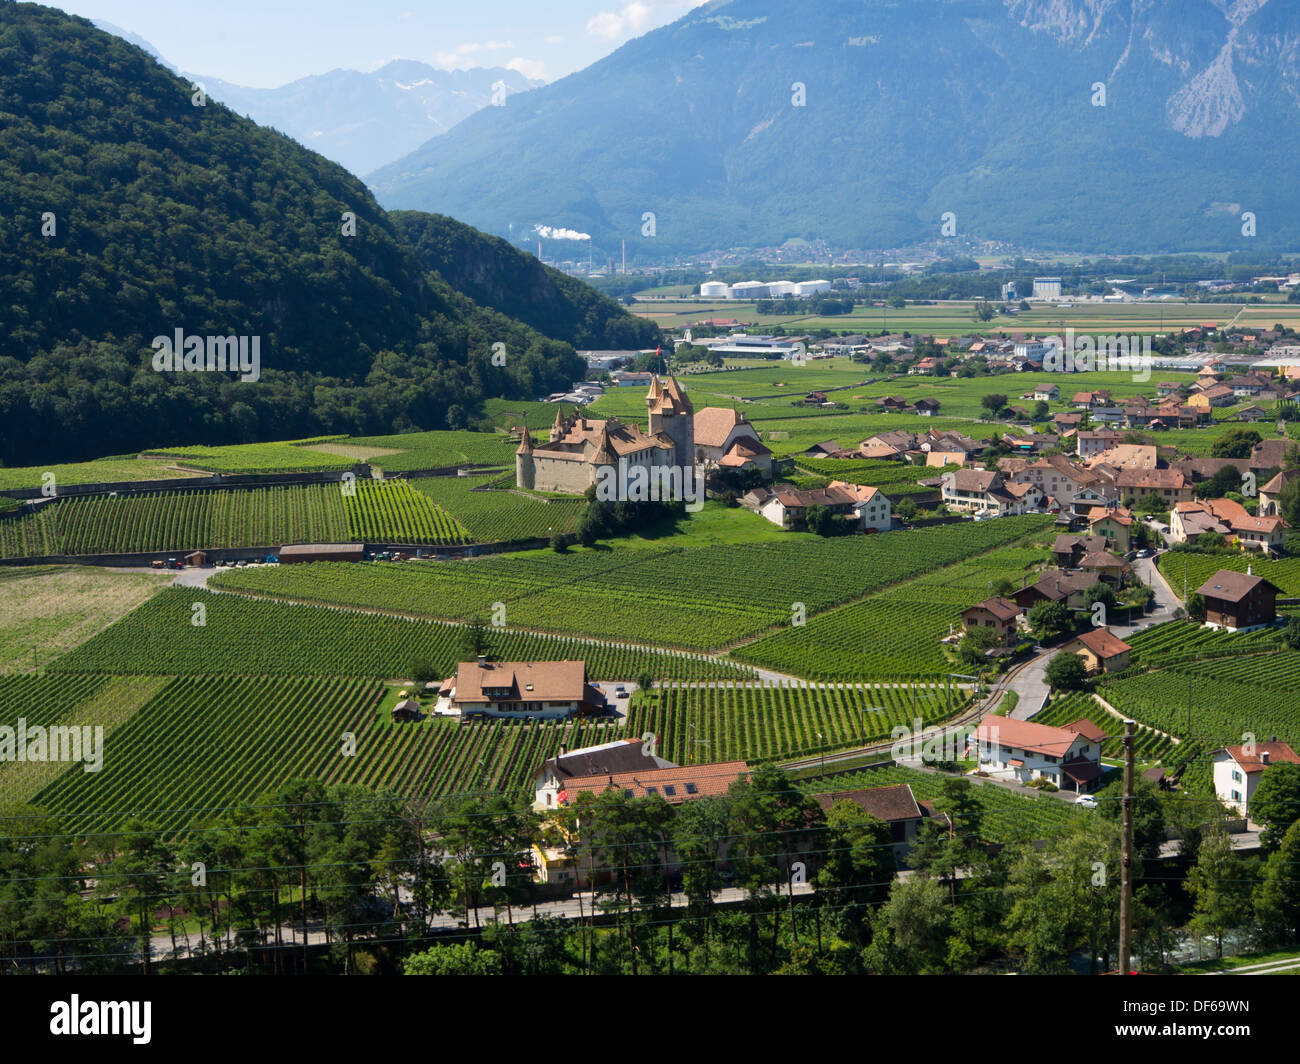 Aigle castle a Swiss heritage and wine museum and surrounding vineyards, Switzerland, wine producing region in valley Photo -